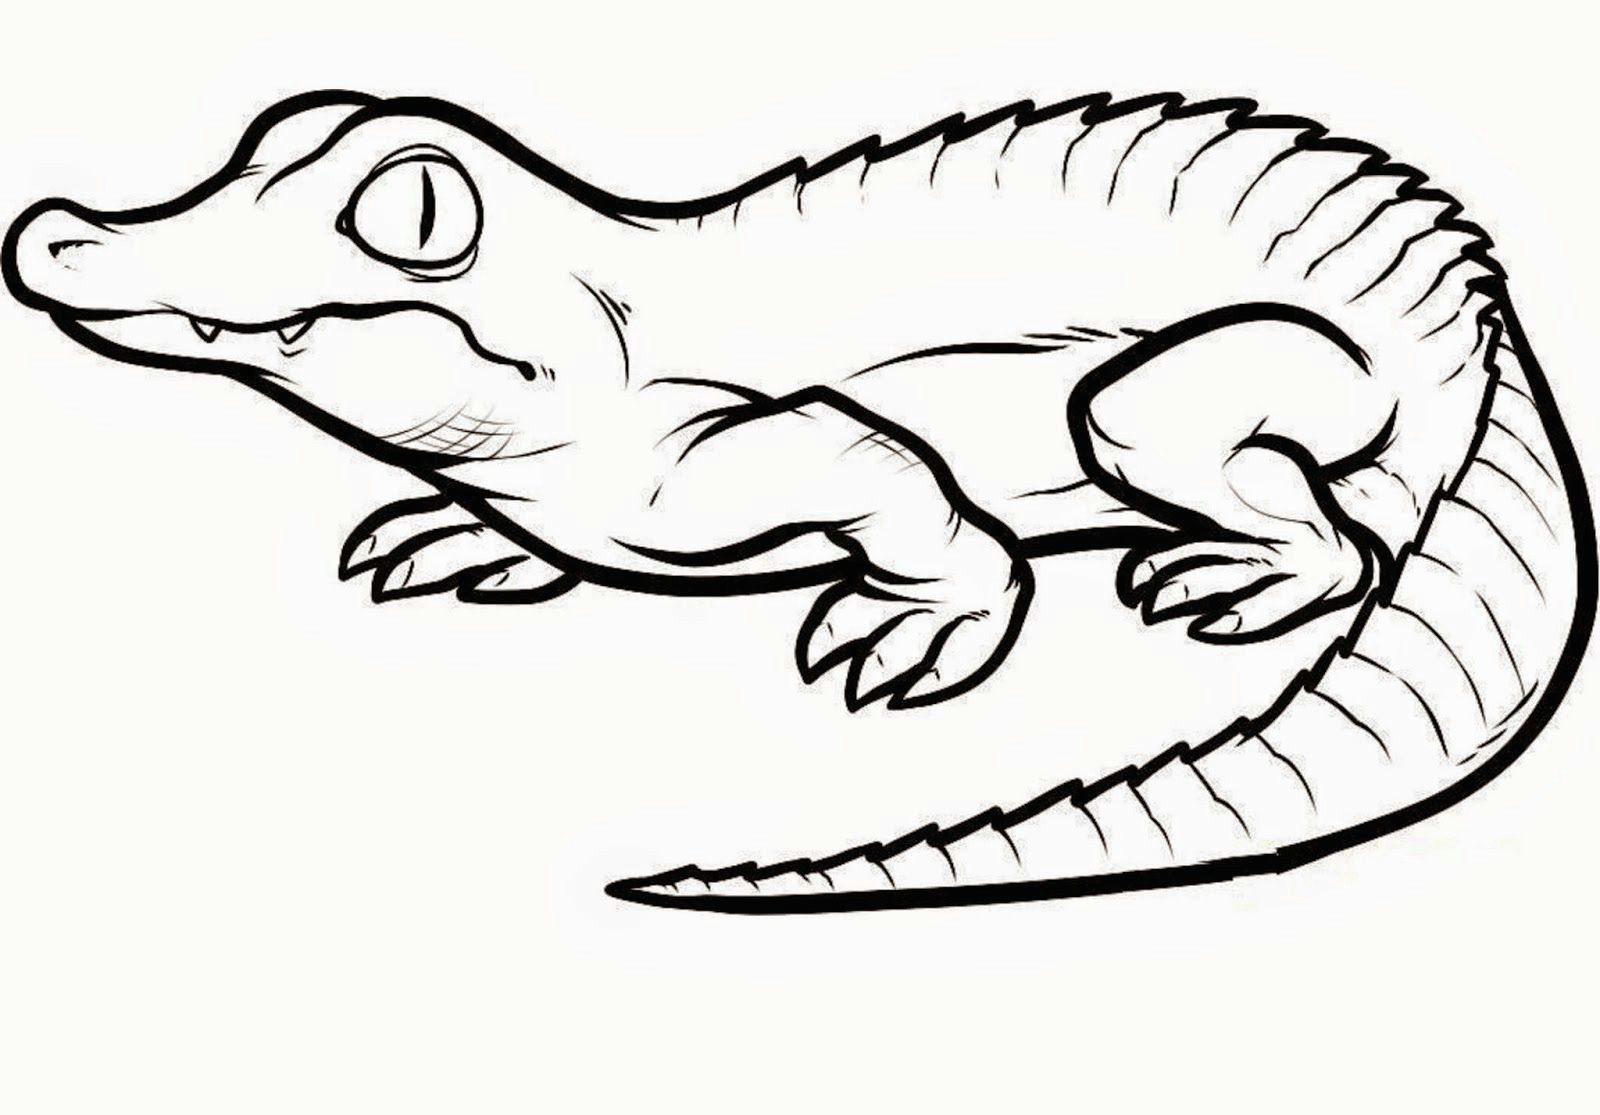 How to Draw An Easy Crocodile Crocodiles Colour Drawing Hd Wallpaper Colorful Drawings